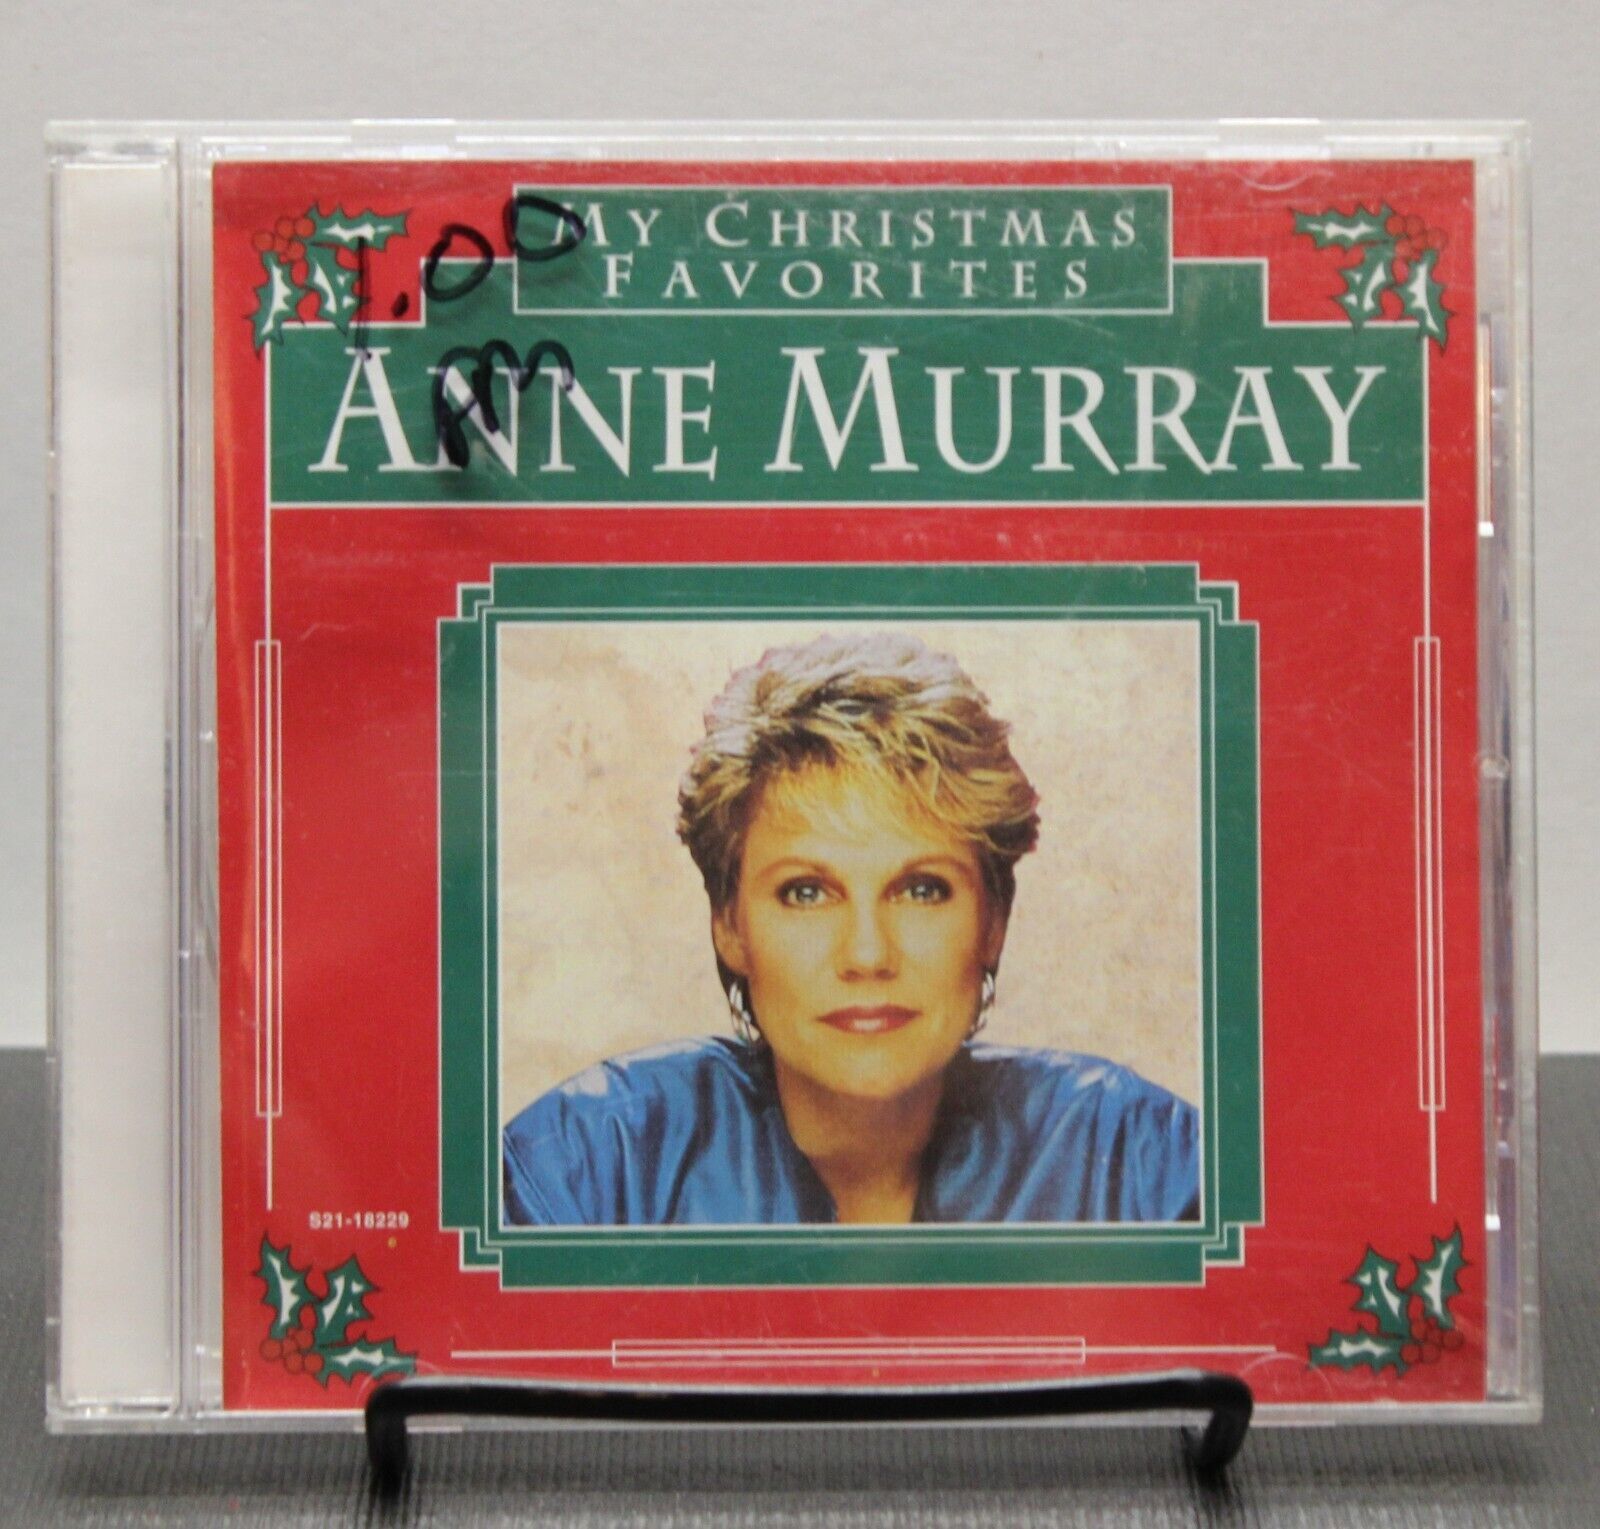 Primary image for My Christmas Favorites by Murray, Anne (CD, 1995) (km)